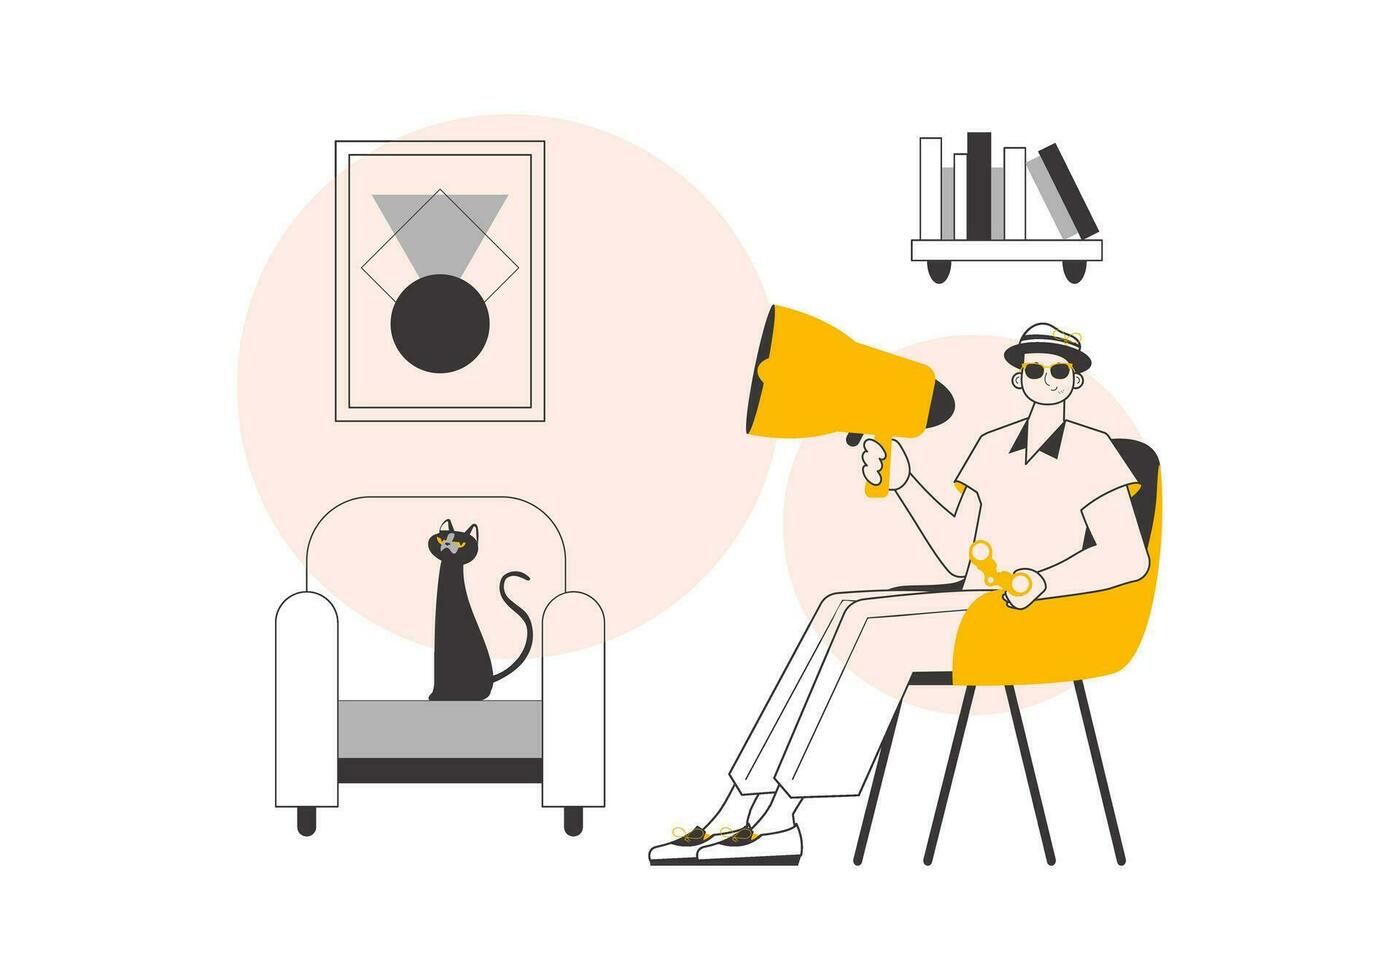 The man is holding a bullhorn in his hands. Minimalistic linear style. Vector illustration.